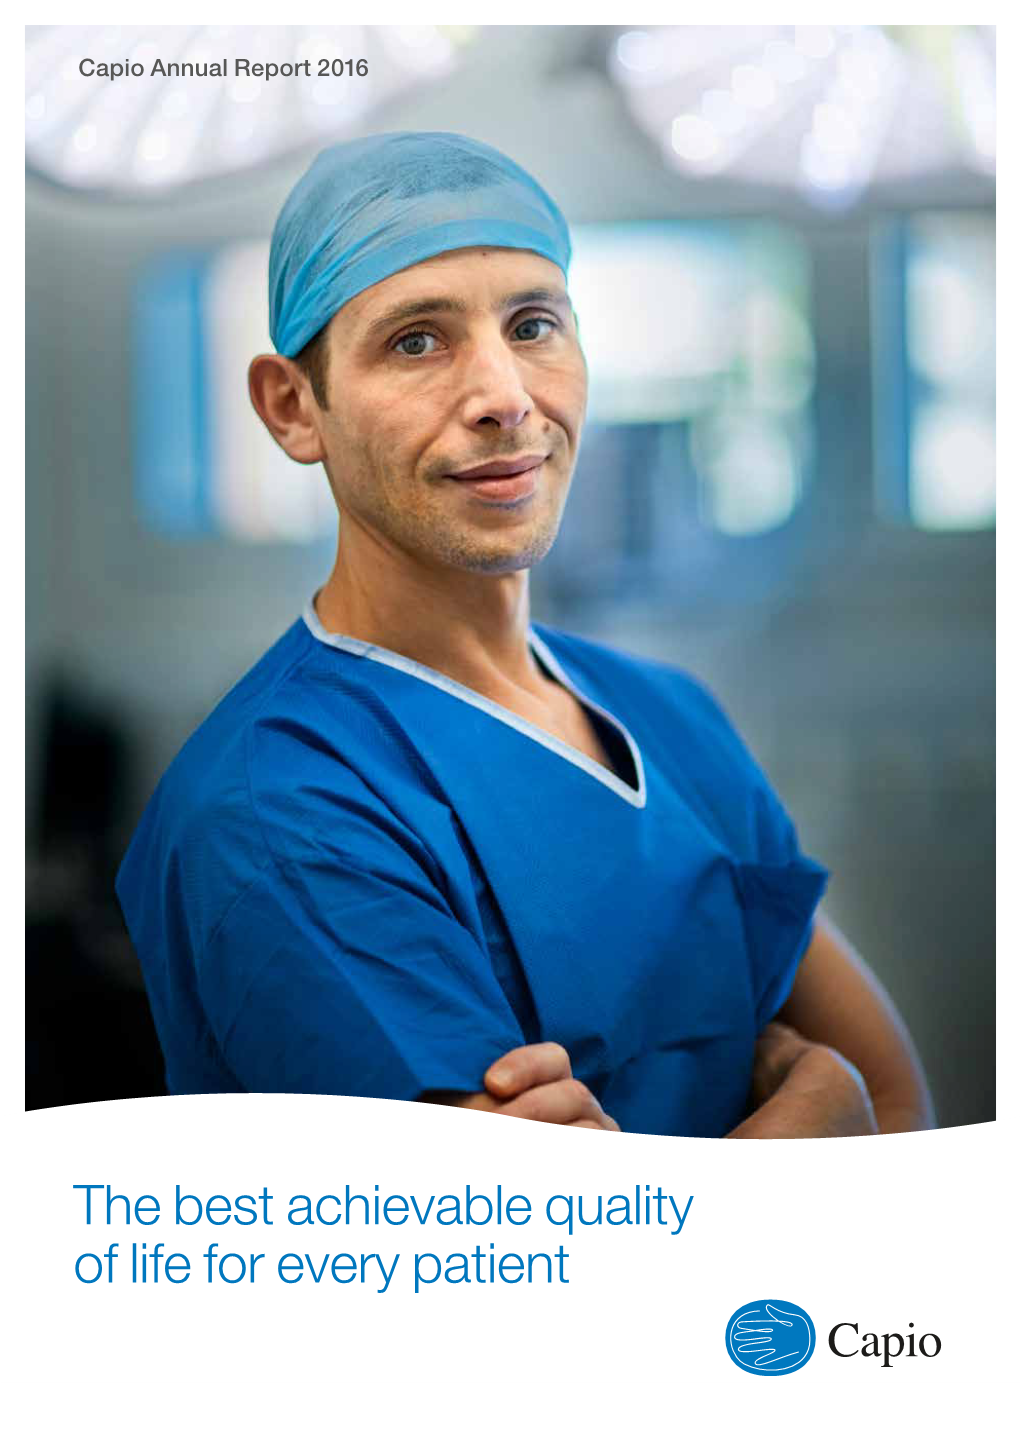 The Best Achievable Quality of Life for Every Patient